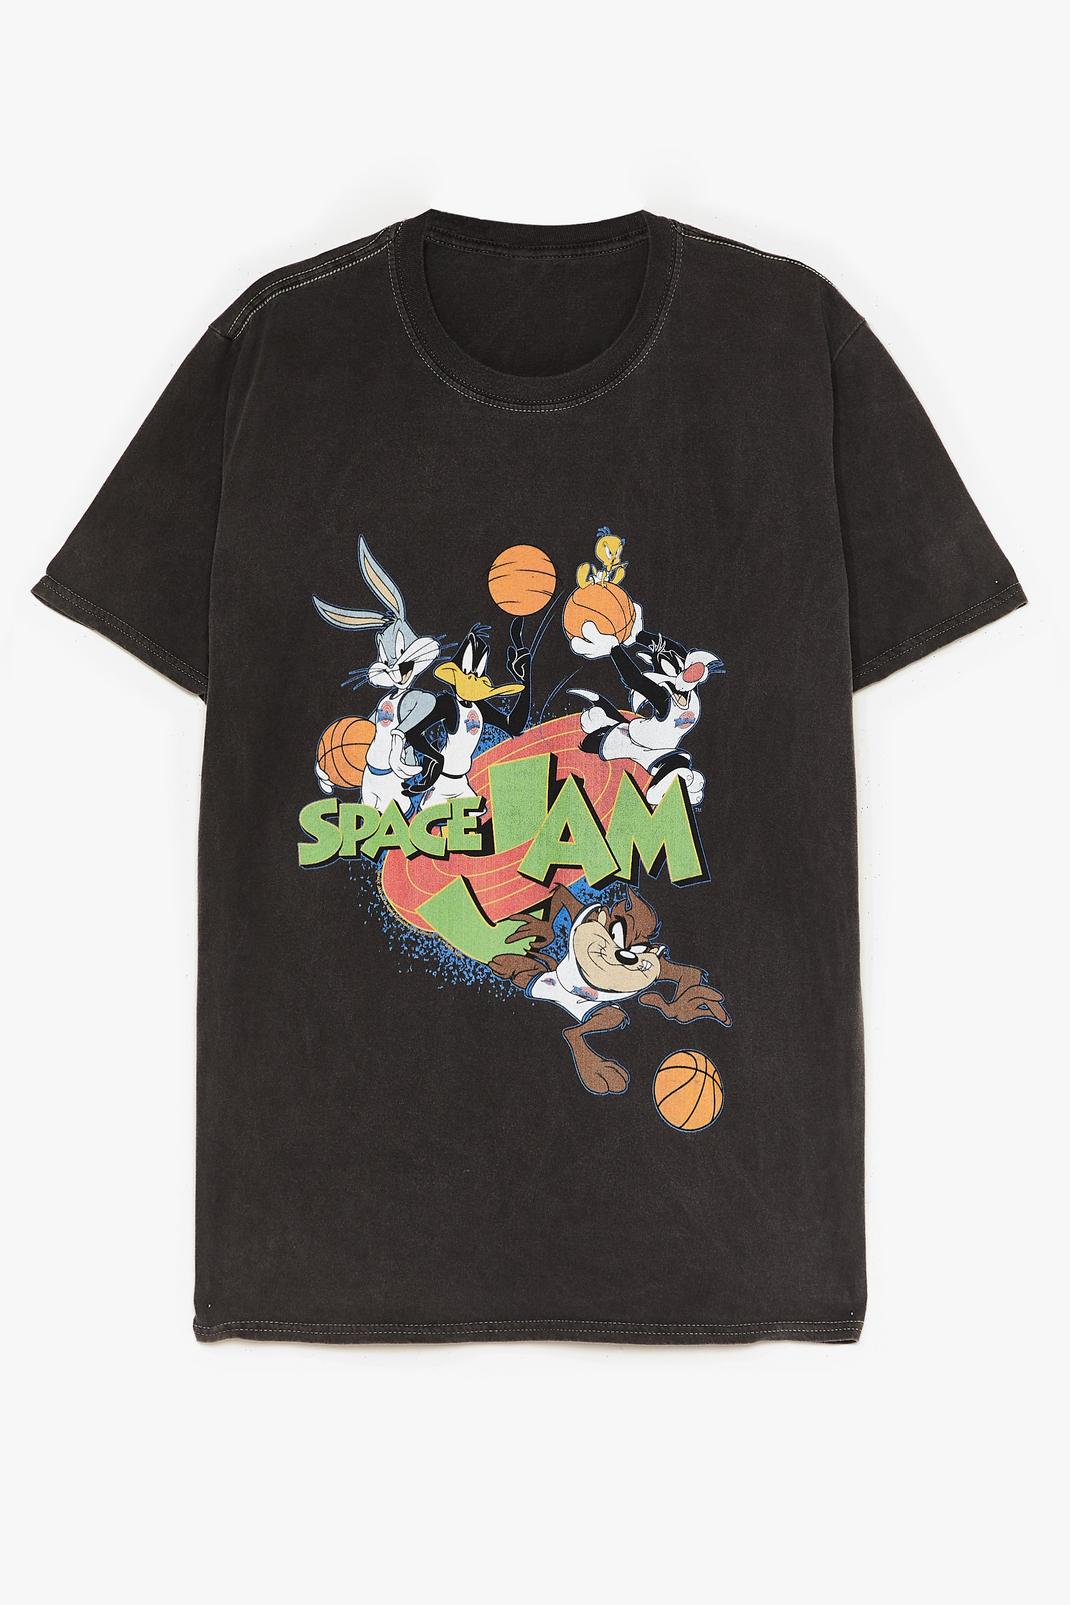 Grey Basketballs in Your Court Space Jam Graphic Tee image number 1